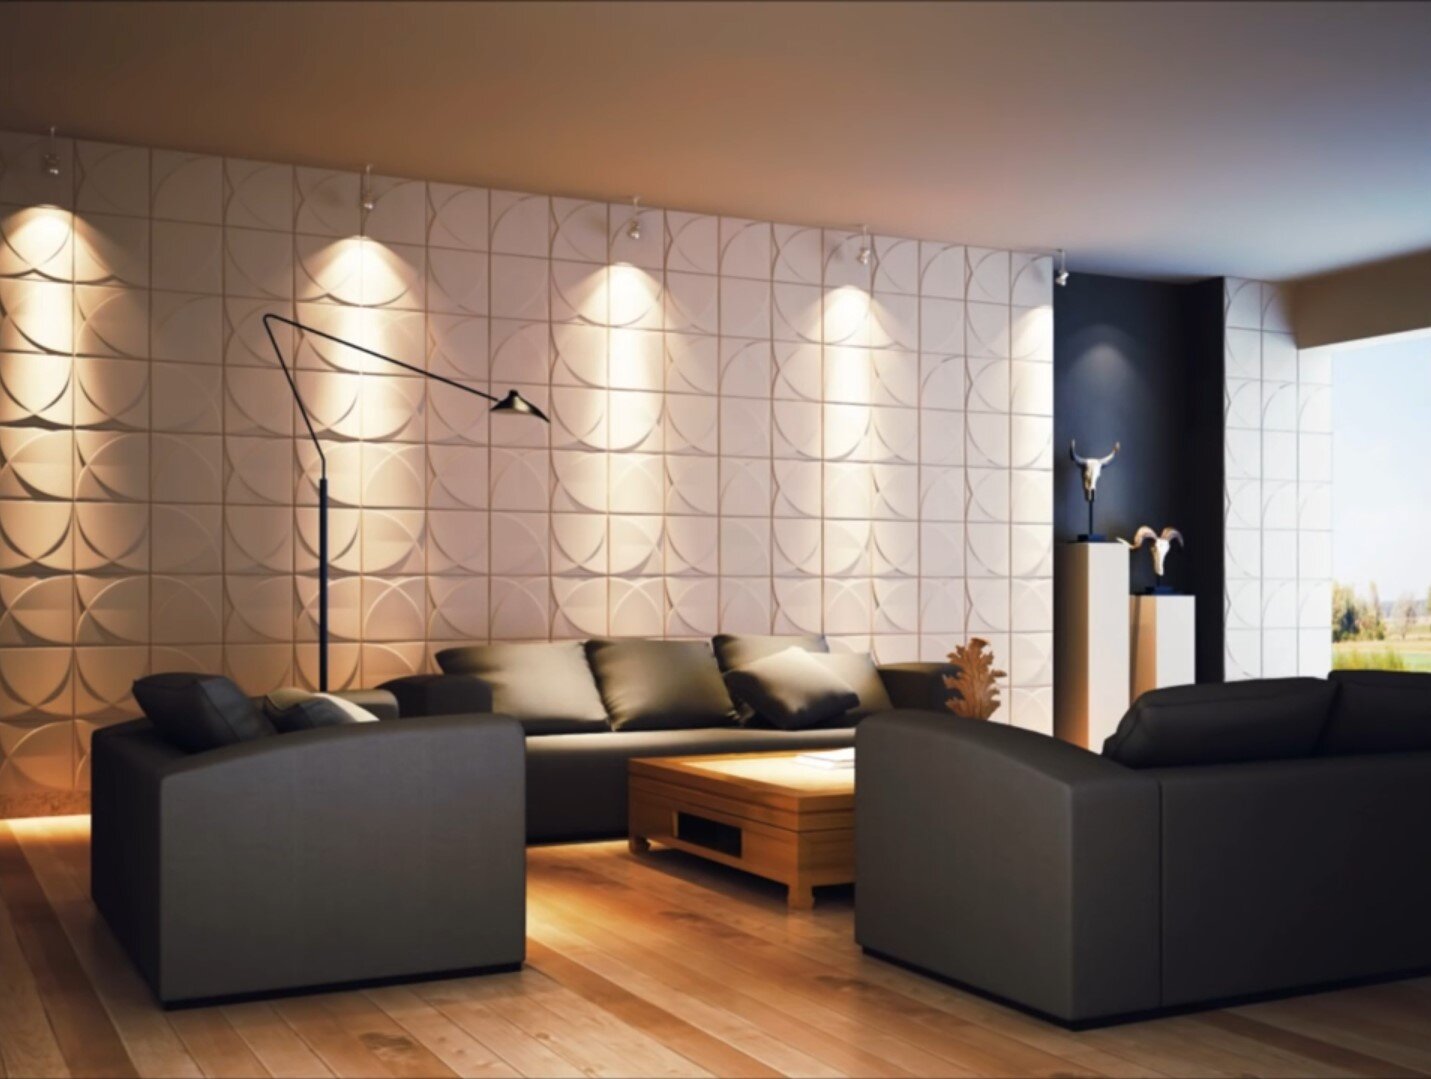 Accent Wall Ideas Beyond The Ordinary - Reflect Your Personal Style 00018.jpg